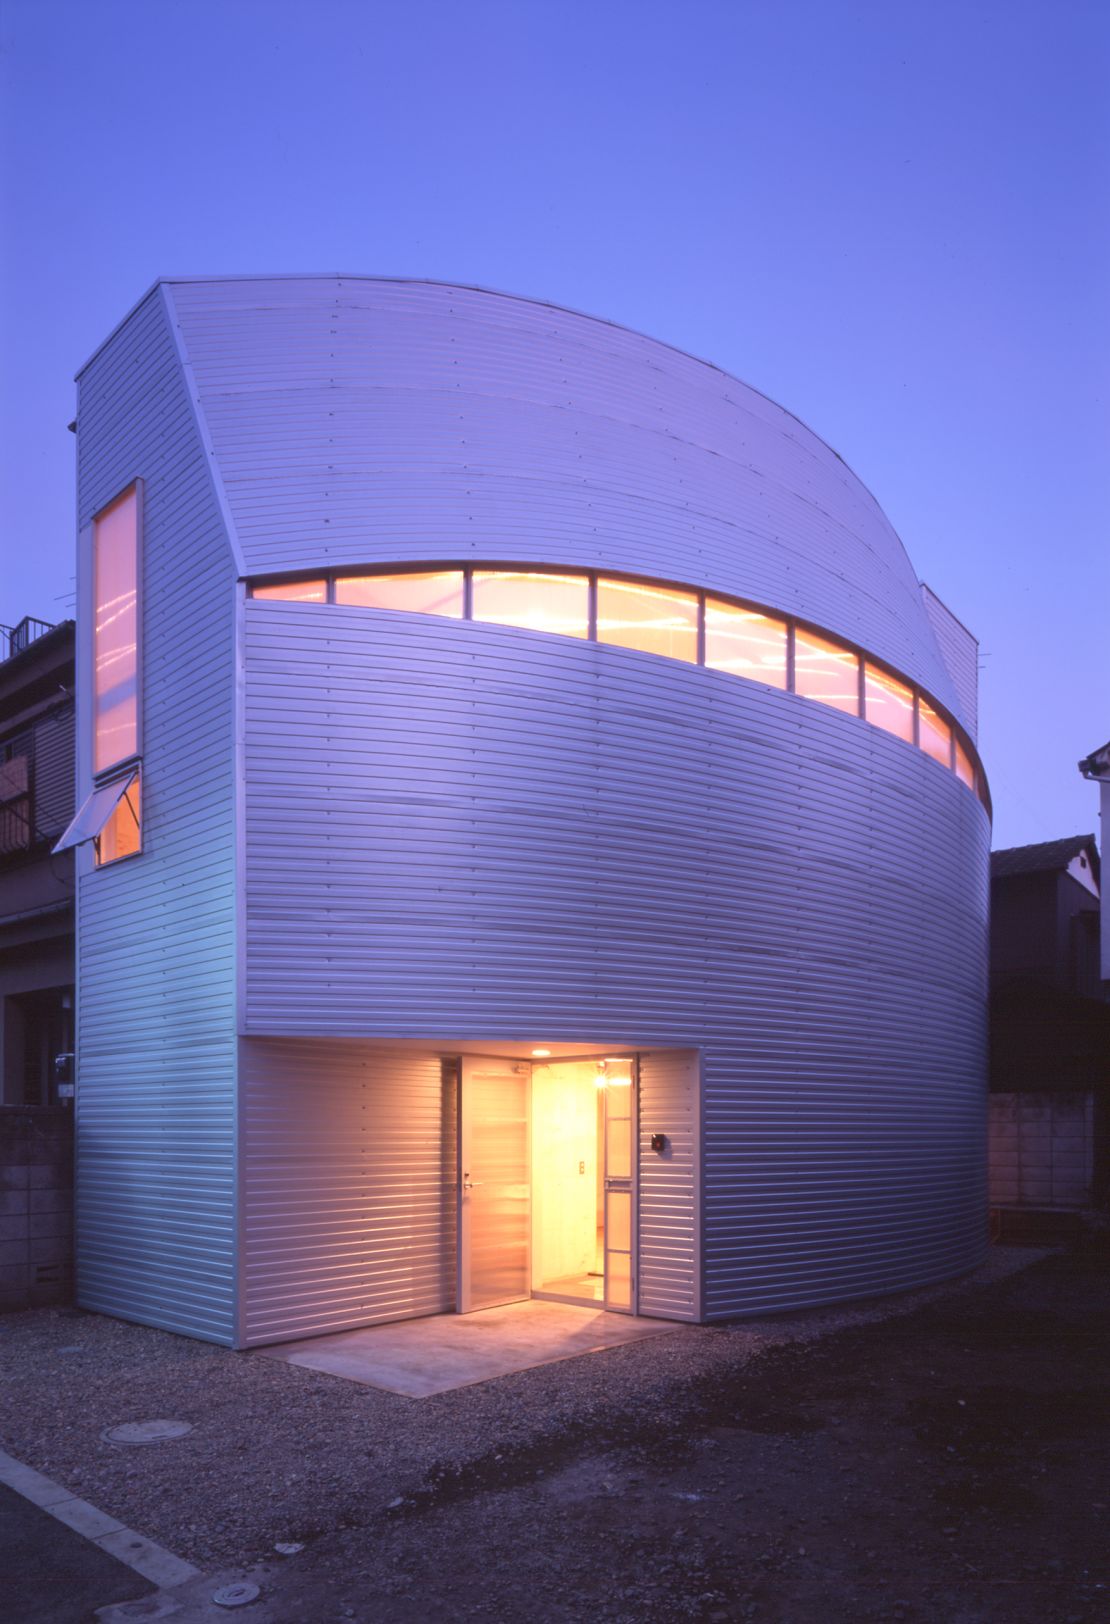 Designed by Atelier Tekuto for a family of five, Iron Mask is steel-based house with a unique curving facade that made the most of the site's shape.